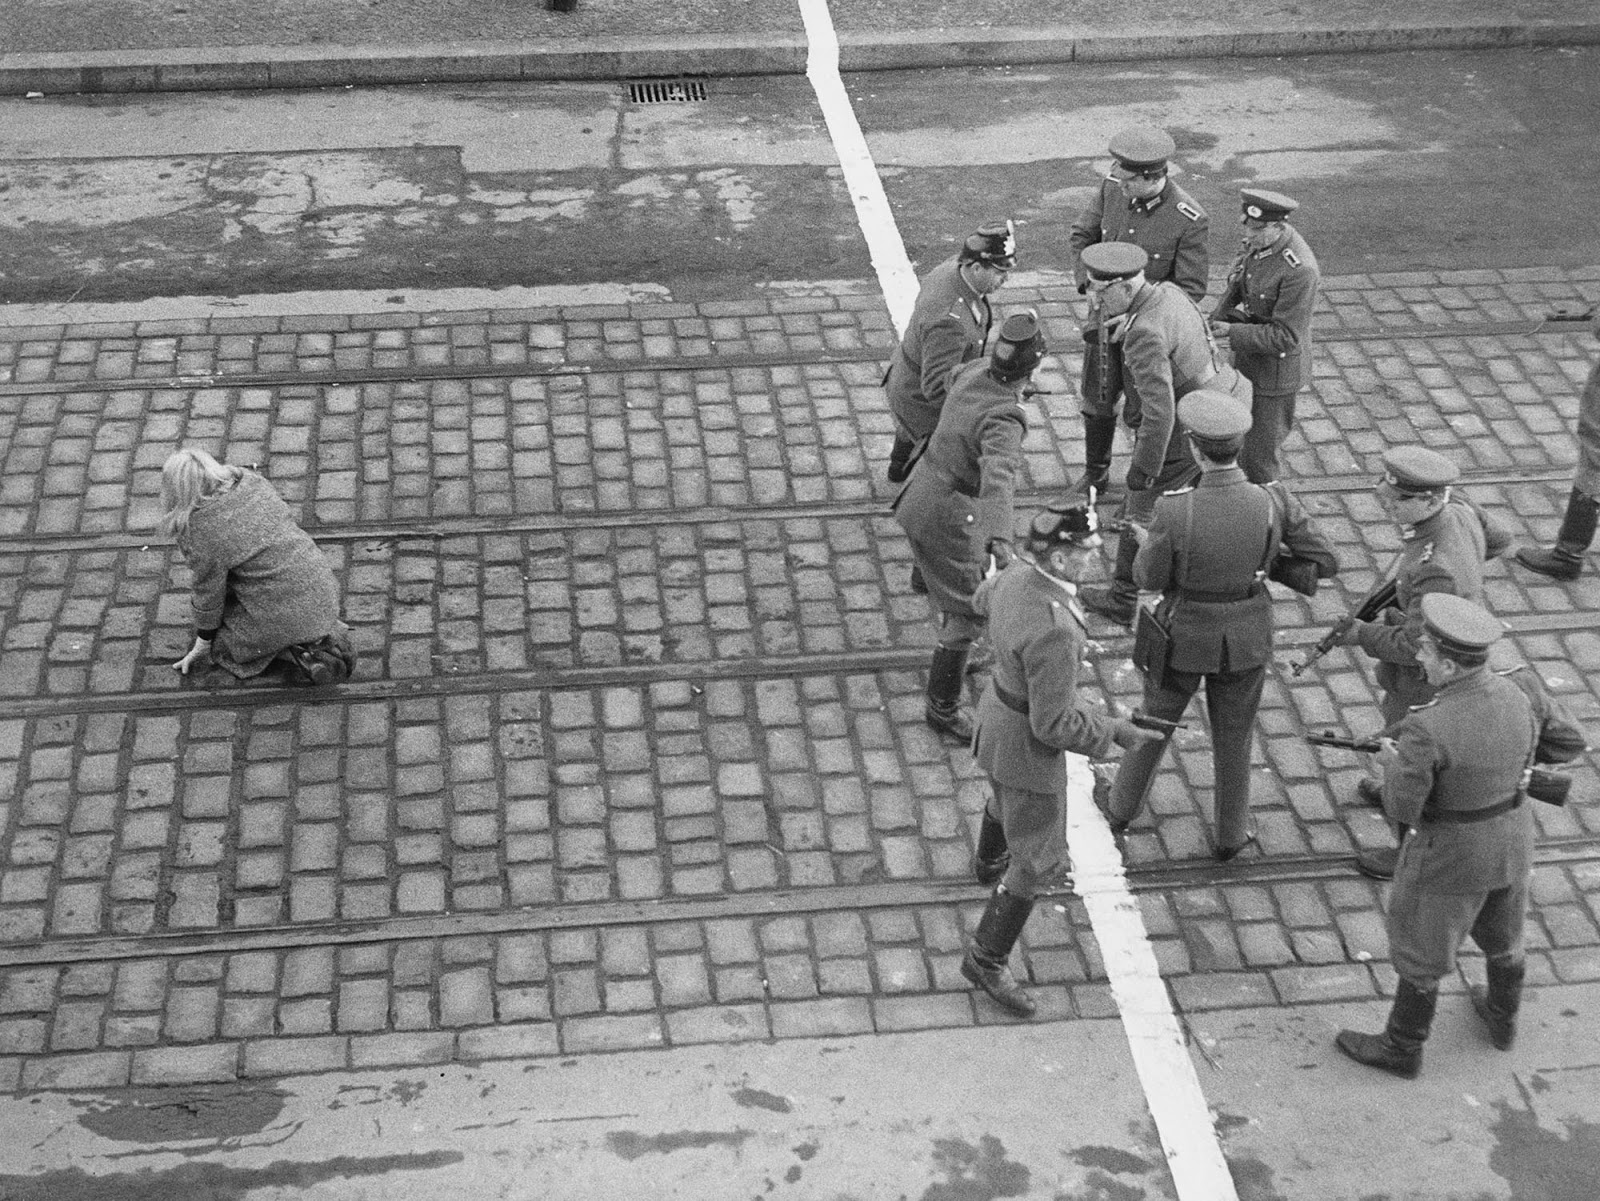 East German and West German border guards have a stand off after an East German woman crossed the boundary into West Berlin.